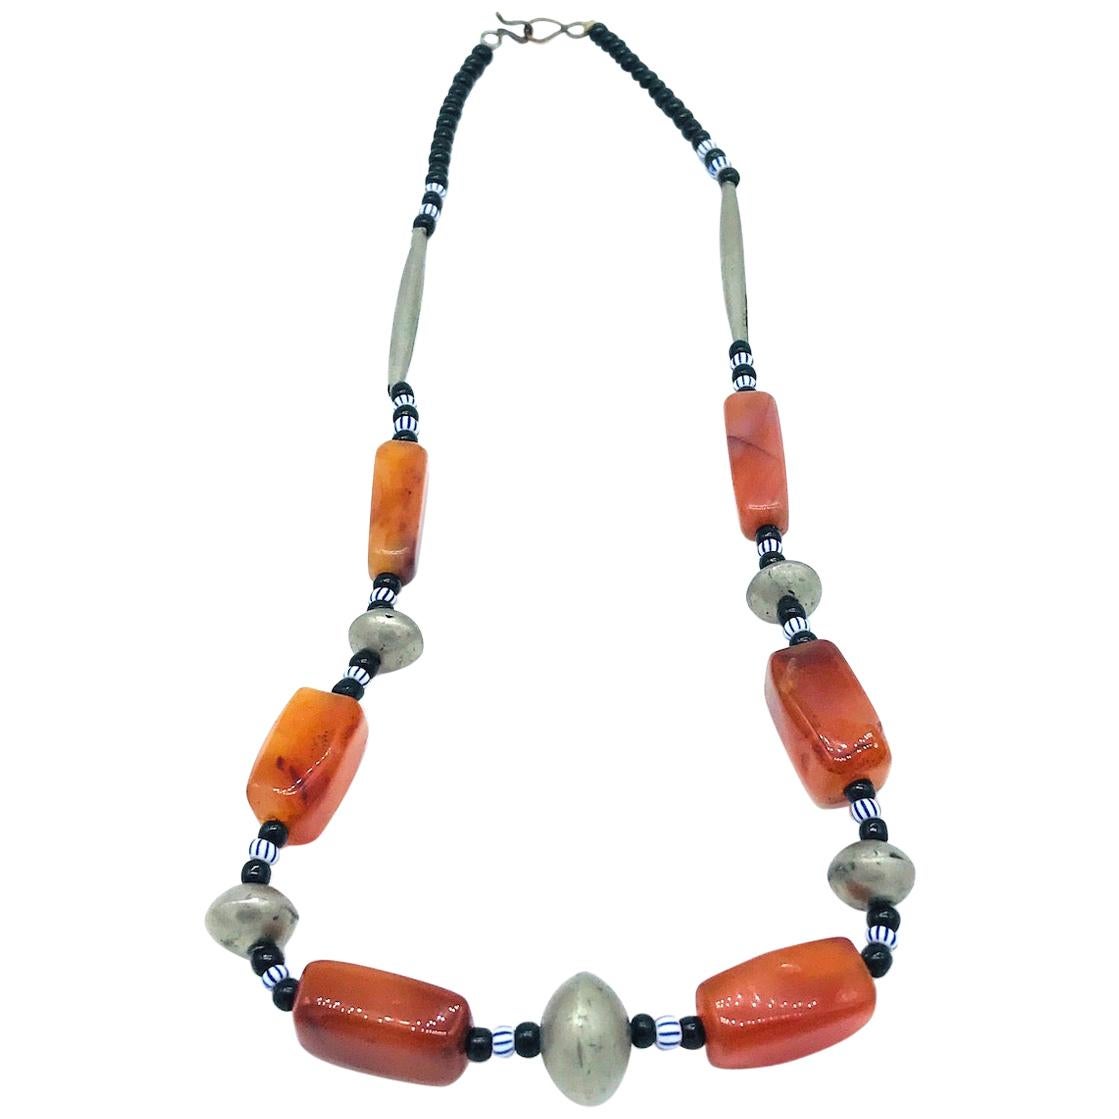 Rare Mali Africa, Orange Bead Hand Painted Necklace For Sale